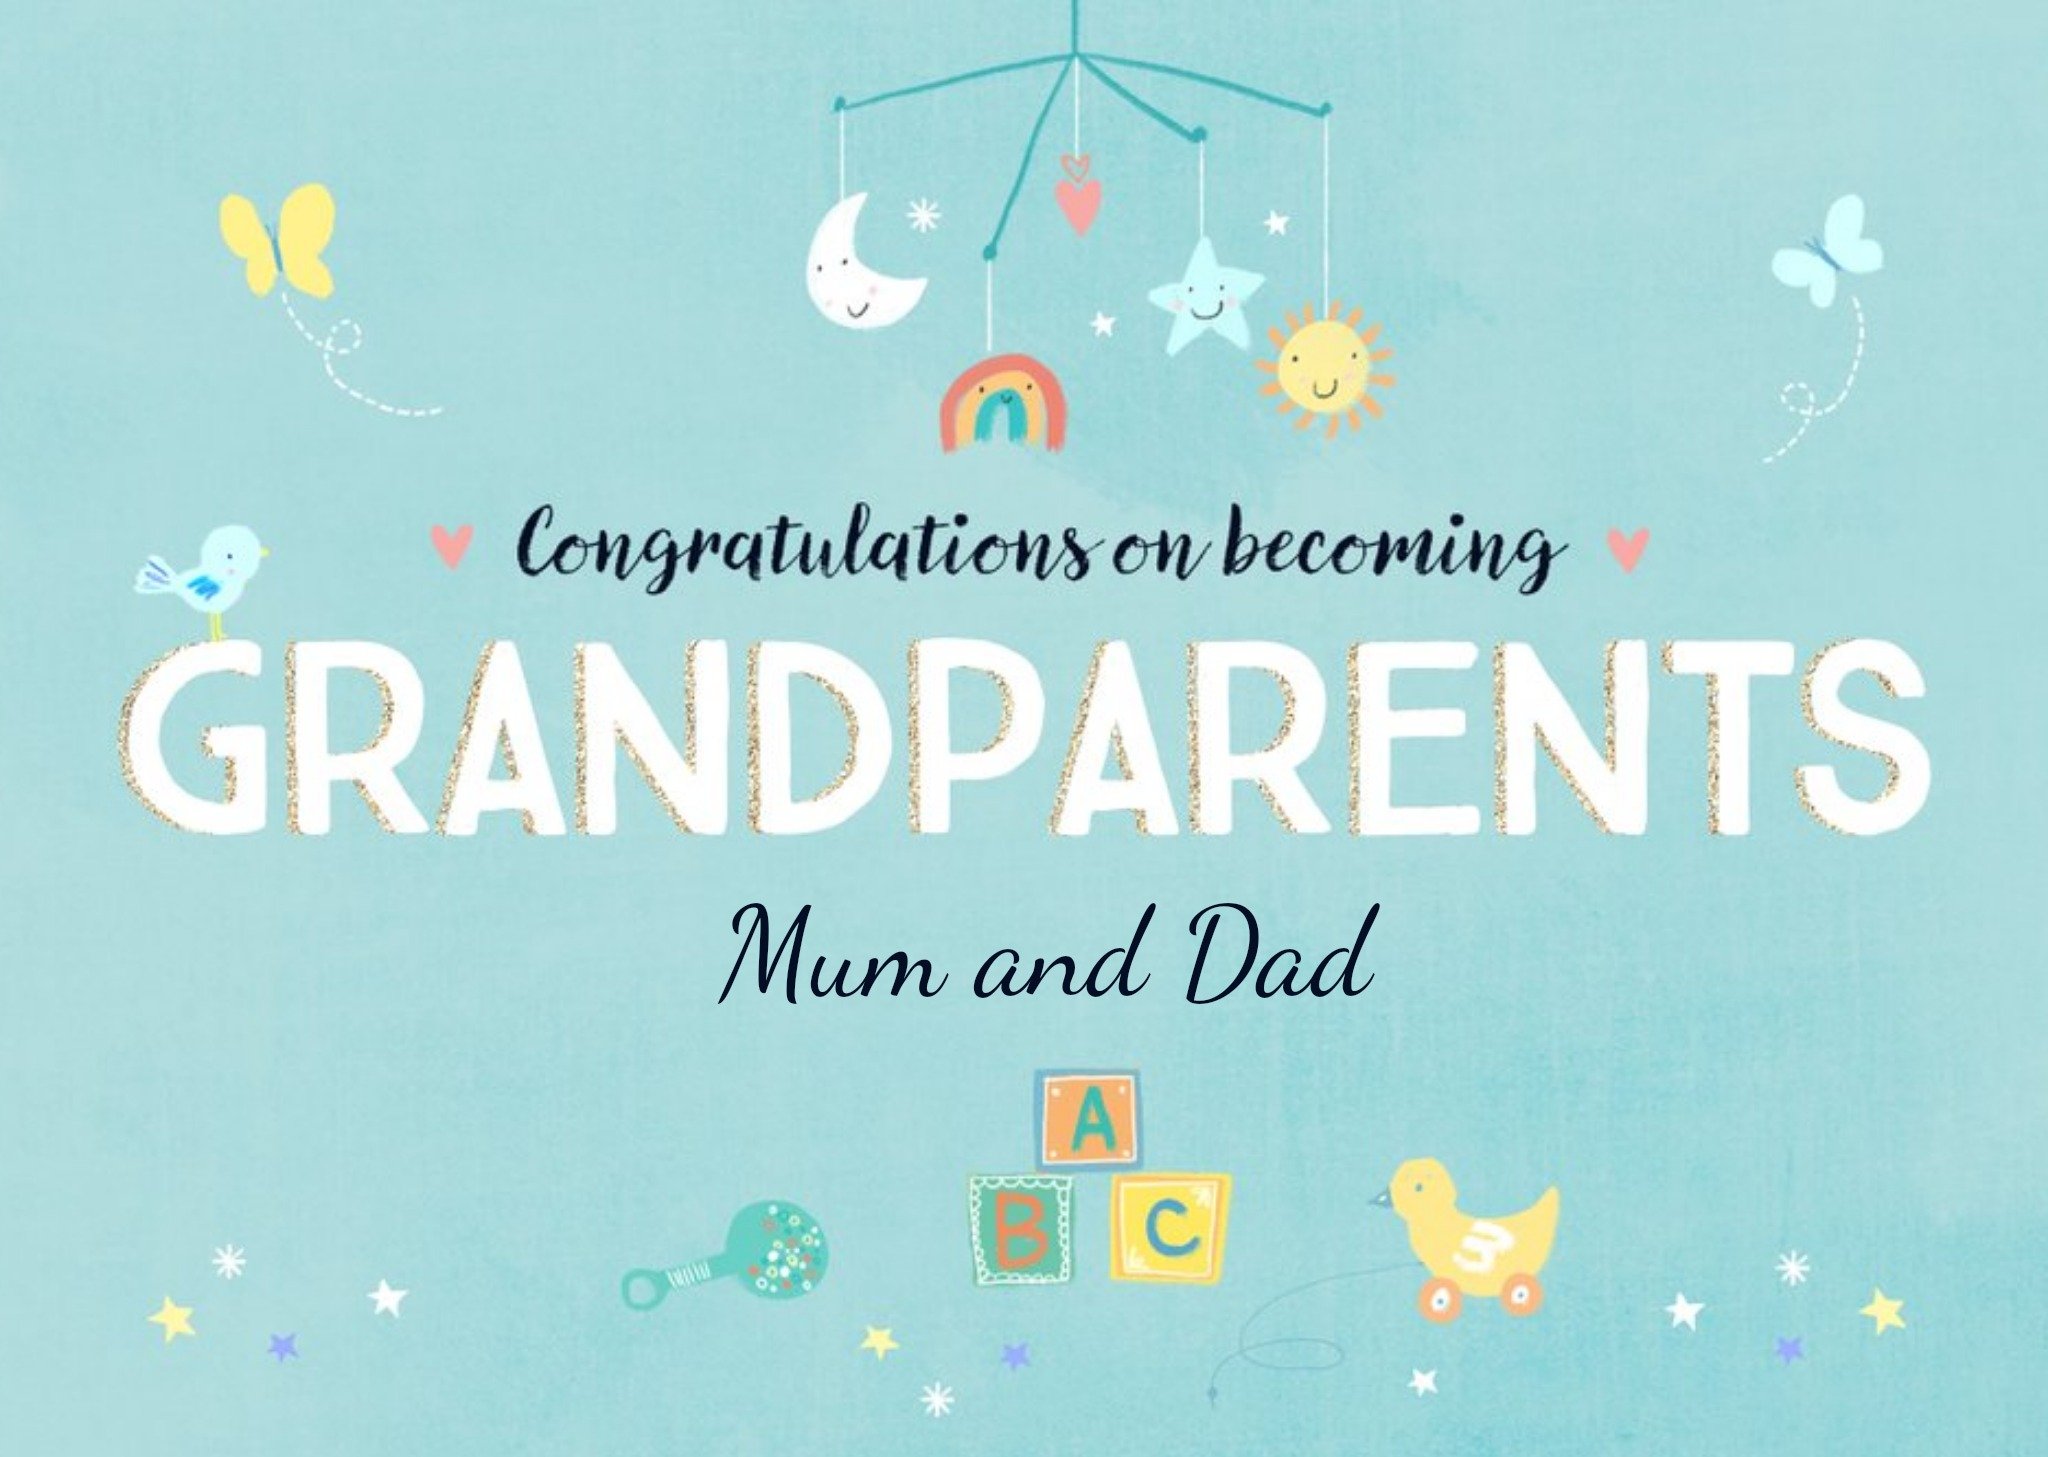 Moonpig Typographic Illustrated Congratulations On Becoming Grandparents Card, Large